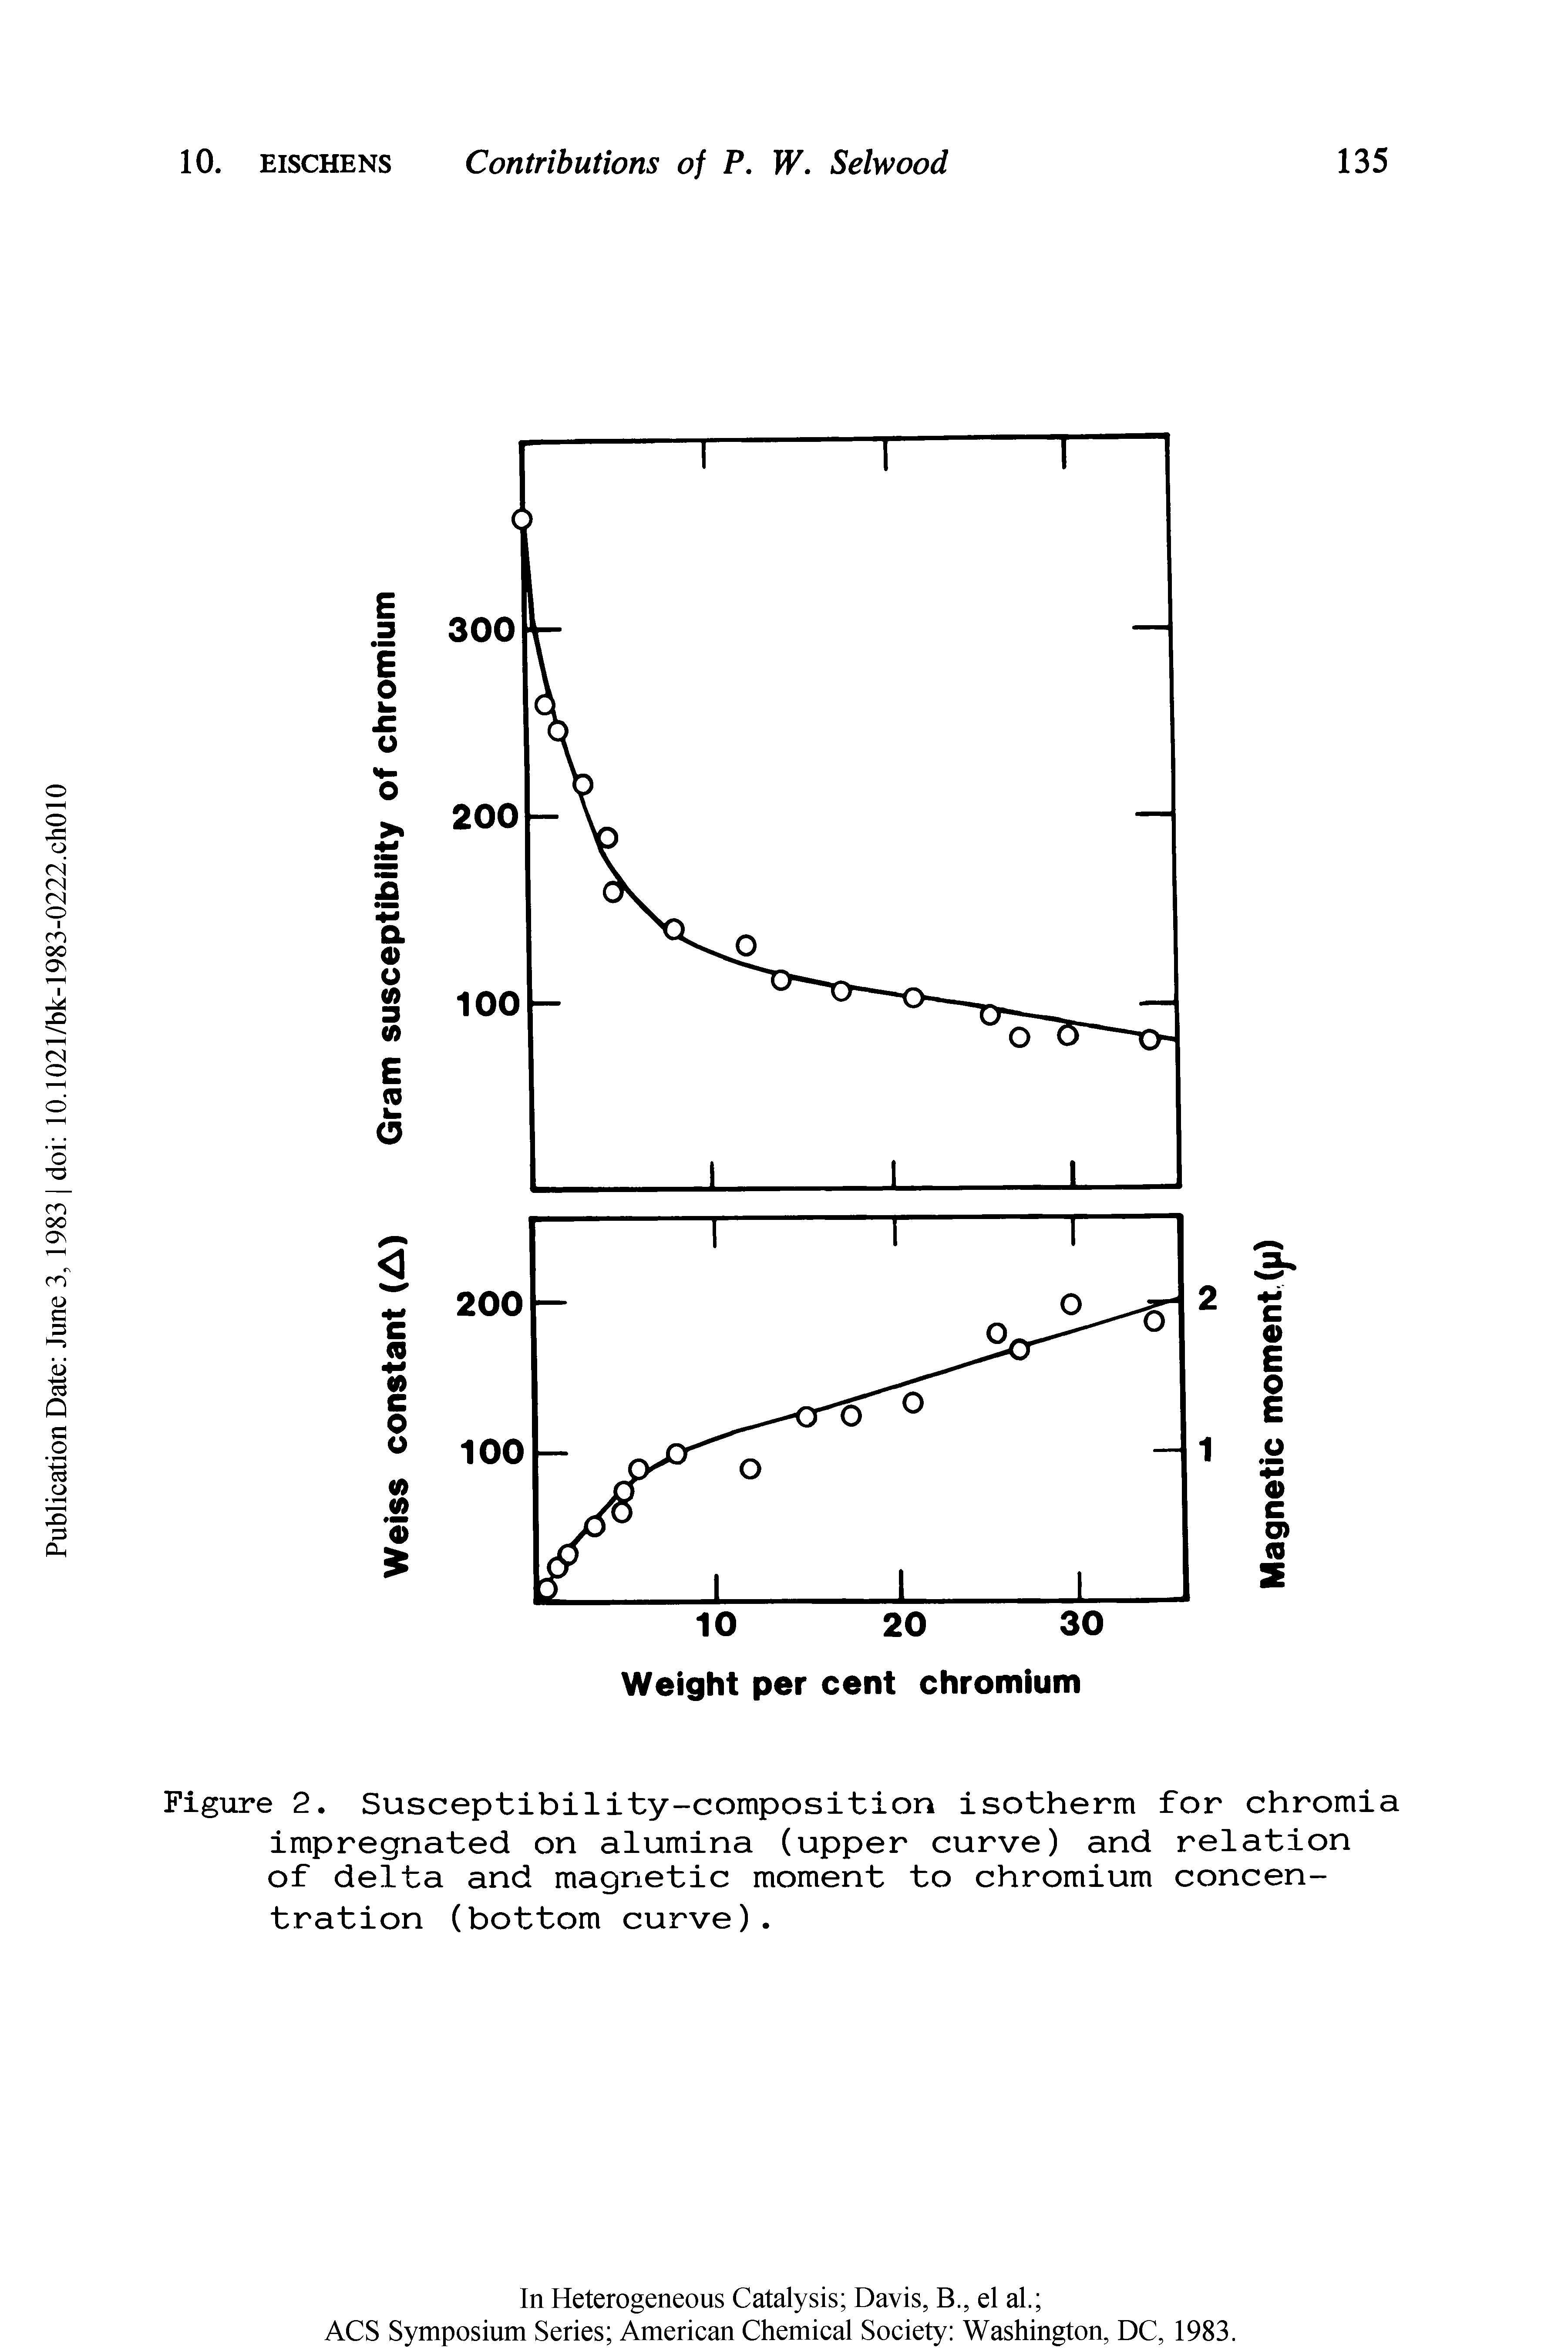 Figure 2. Susceptibility-composition isotherm for chromia impregnated on alumina (upper curve) and relation of delta and magnetic moment to chromium concentration (bottom curve).